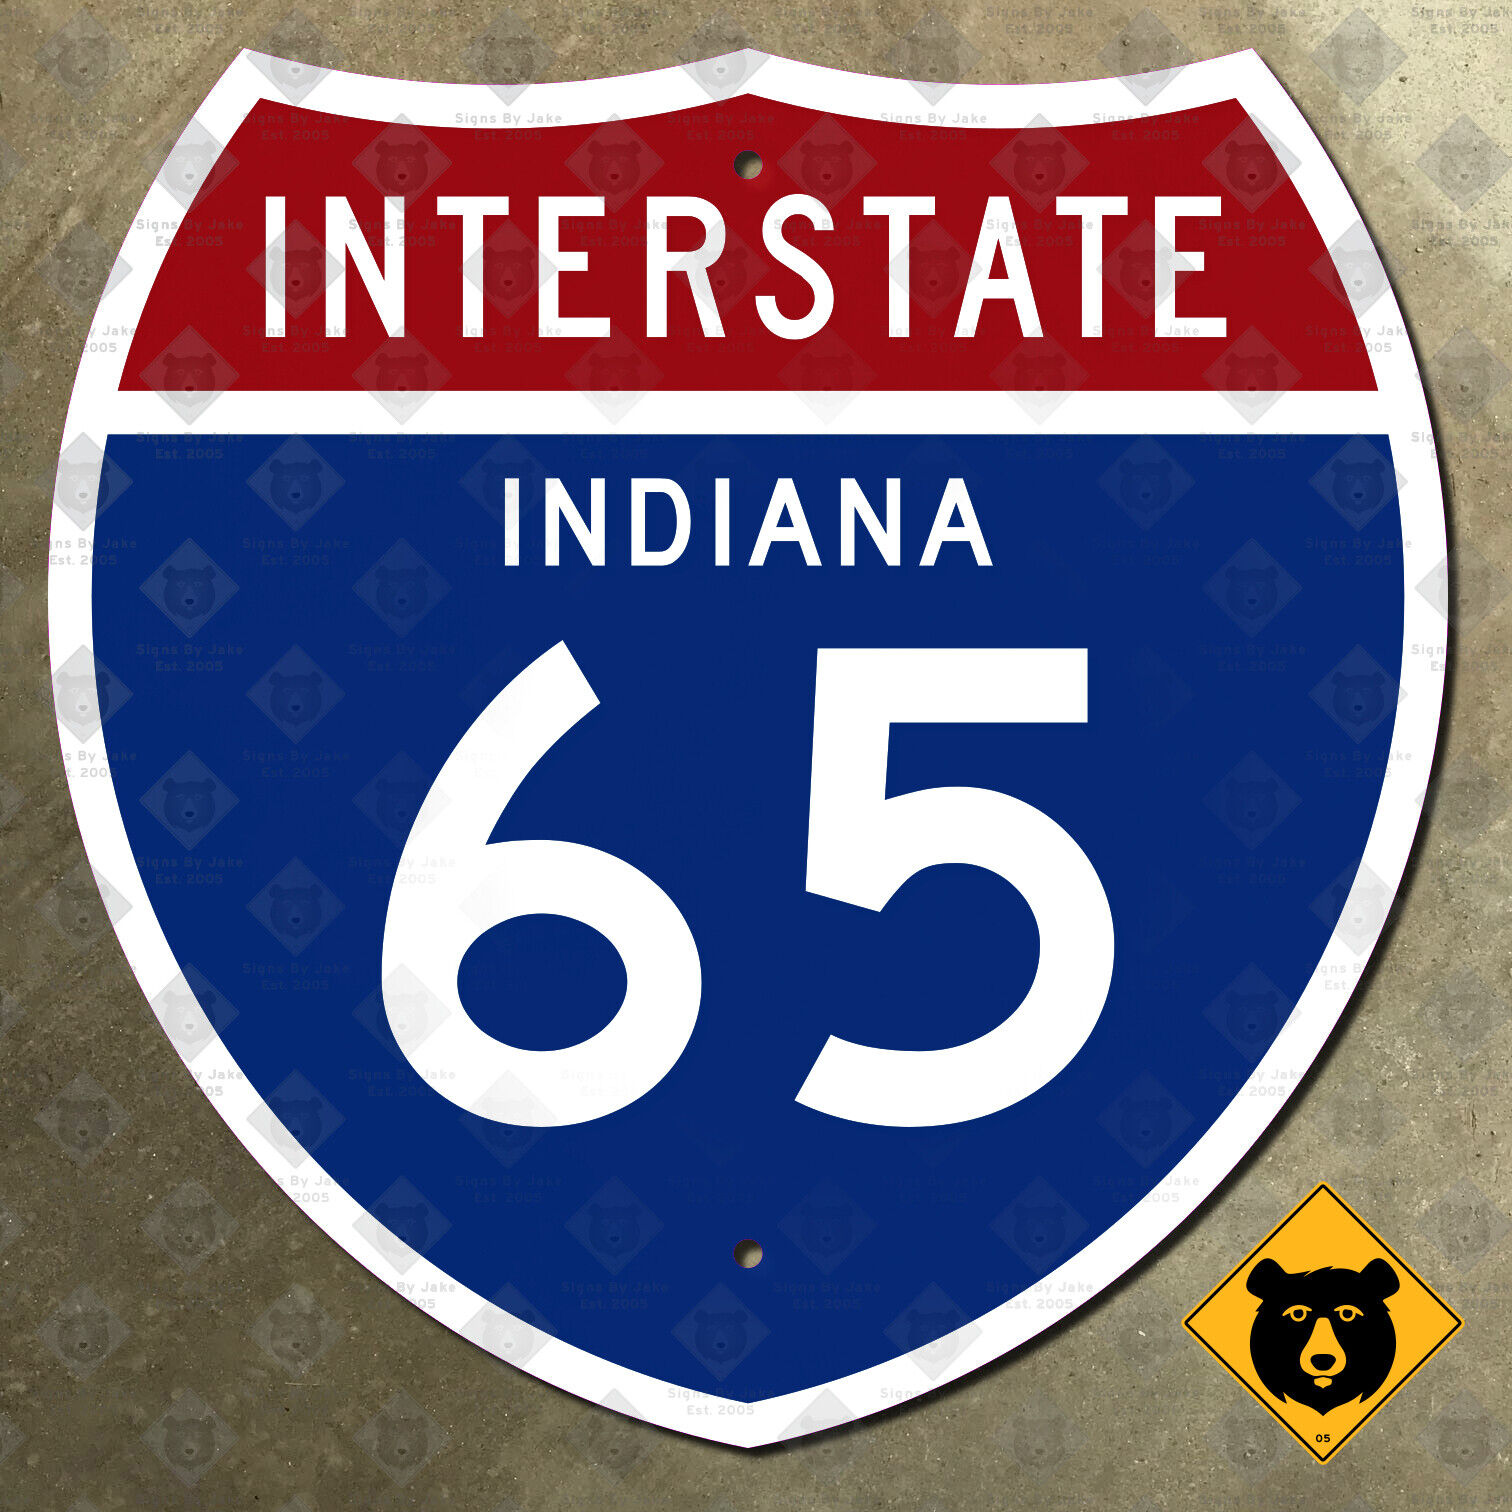 Indiana Interstate 65 highway route marker road sign Indianapolis Chicago 12x12